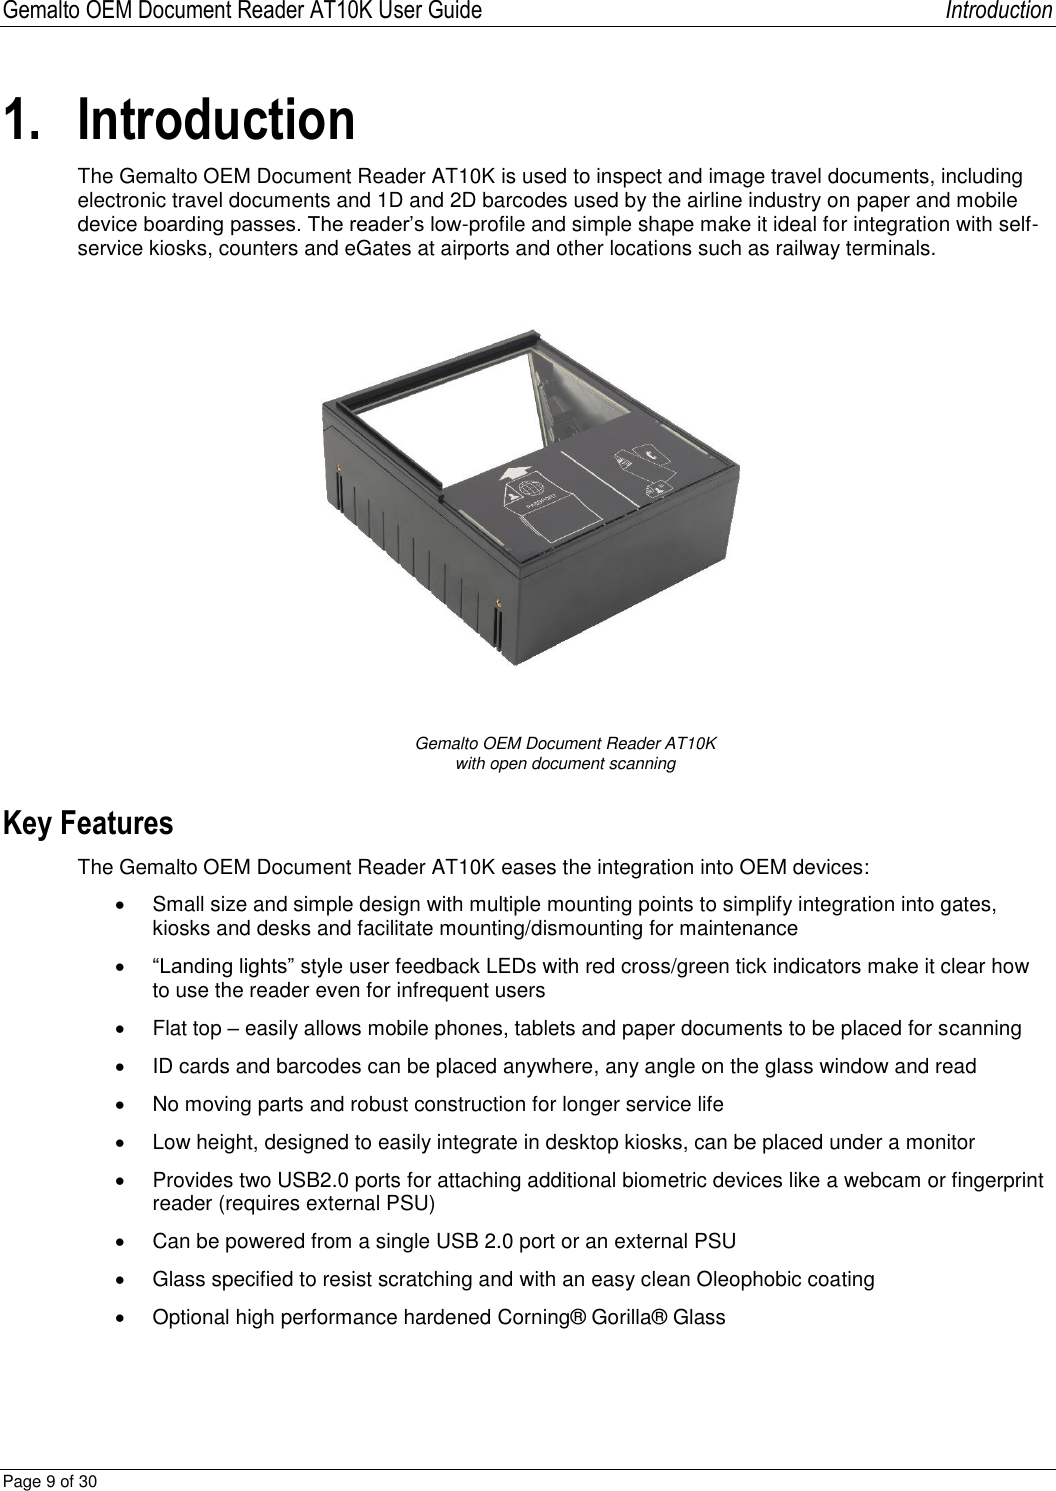 Gemalto OEM Document Reader AT10K User Guide   Introduction Page 9 of 30  1. Introduction The Gemalto OEM Document Reader AT10K is used to inspect and image travel documents, including electronic travel documents and 1D and 2D barcodes used by the airline industry on paper and mobile device boarding passes. The reader’s low-profile and simple shape make it ideal for integration with self-service kiosks, counters and eGates at airports and other locations such as railway terminals.   Gemalto OEM Document Reader AT10K with open document scanning Key Features The Gemalto OEM Document Reader AT10K eases the integration into OEM devices:   Small size and simple design with multiple mounting points to simplify integration into gates, kiosks and desks and facilitate mounting/dismounting for maintenance  “Landing lights” style user feedback LEDs with red cross/green tick indicators make it clear how to use the reader even for infrequent users    Flat top – easily allows mobile phones, tablets and paper documents to be placed for scanning   ID cards and barcodes can be placed anywhere, any angle on the glass window and read   No moving parts and robust construction for longer service life   Low height, designed to easily integrate in desktop kiosks, can be placed under a monitor   Provides two USB2.0 ports for attaching additional biometric devices like a webcam or fingerprint reader (requires external PSU)   Can be powered from a single USB 2.0 port or an external PSU    Glass specified to resist scratching and with an easy clean Oleophobic coating   Optional high performance hardened Corning® Gorilla® Glass   